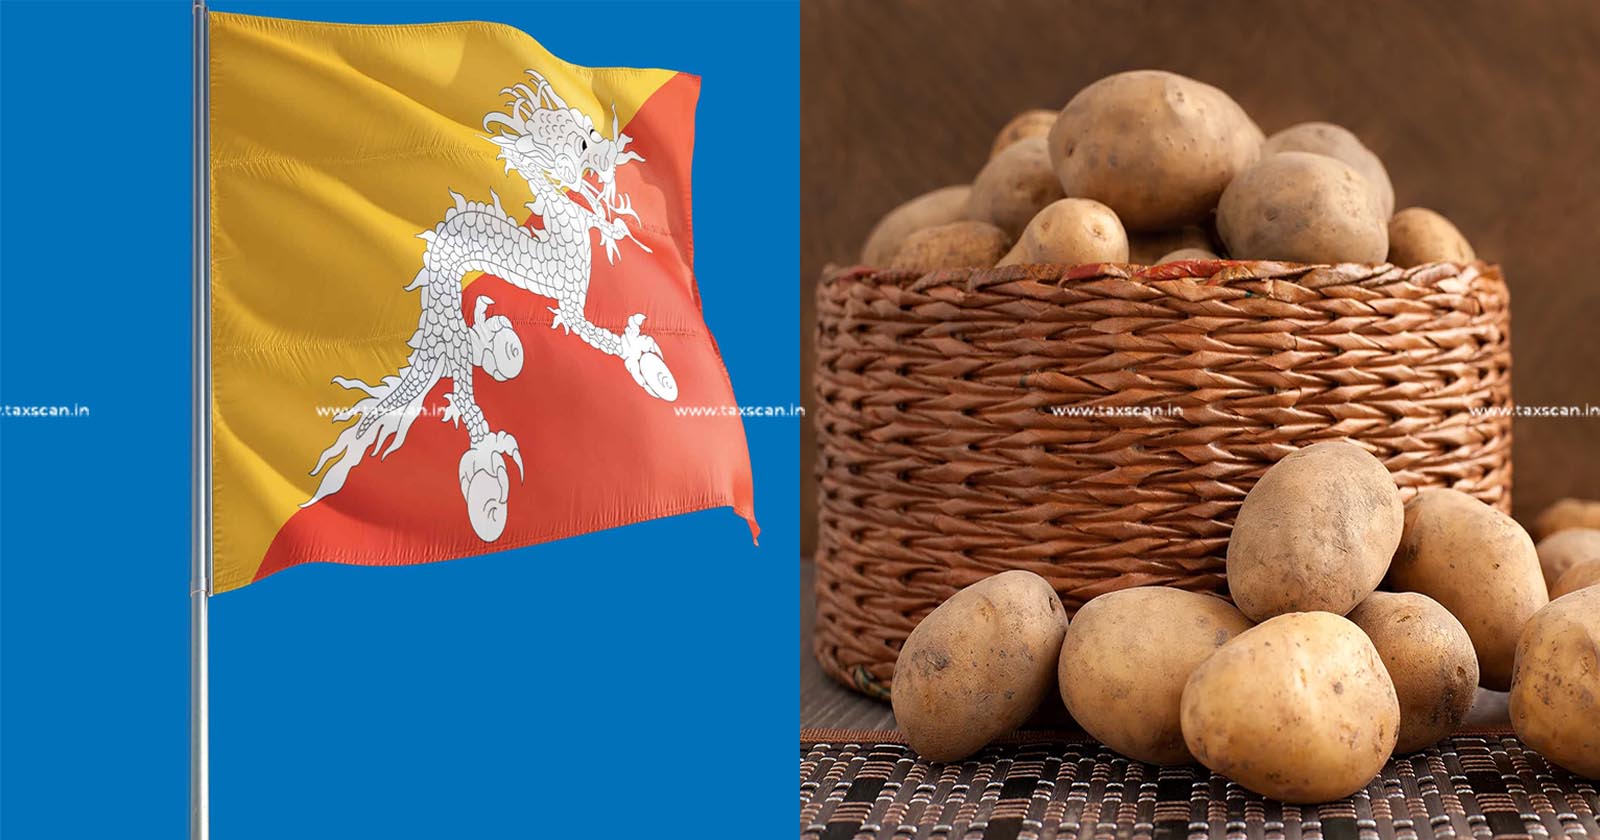 DGFT notifies - Revised Import Policy - Condition of Potatoes from Bhutan - TAXSCAN